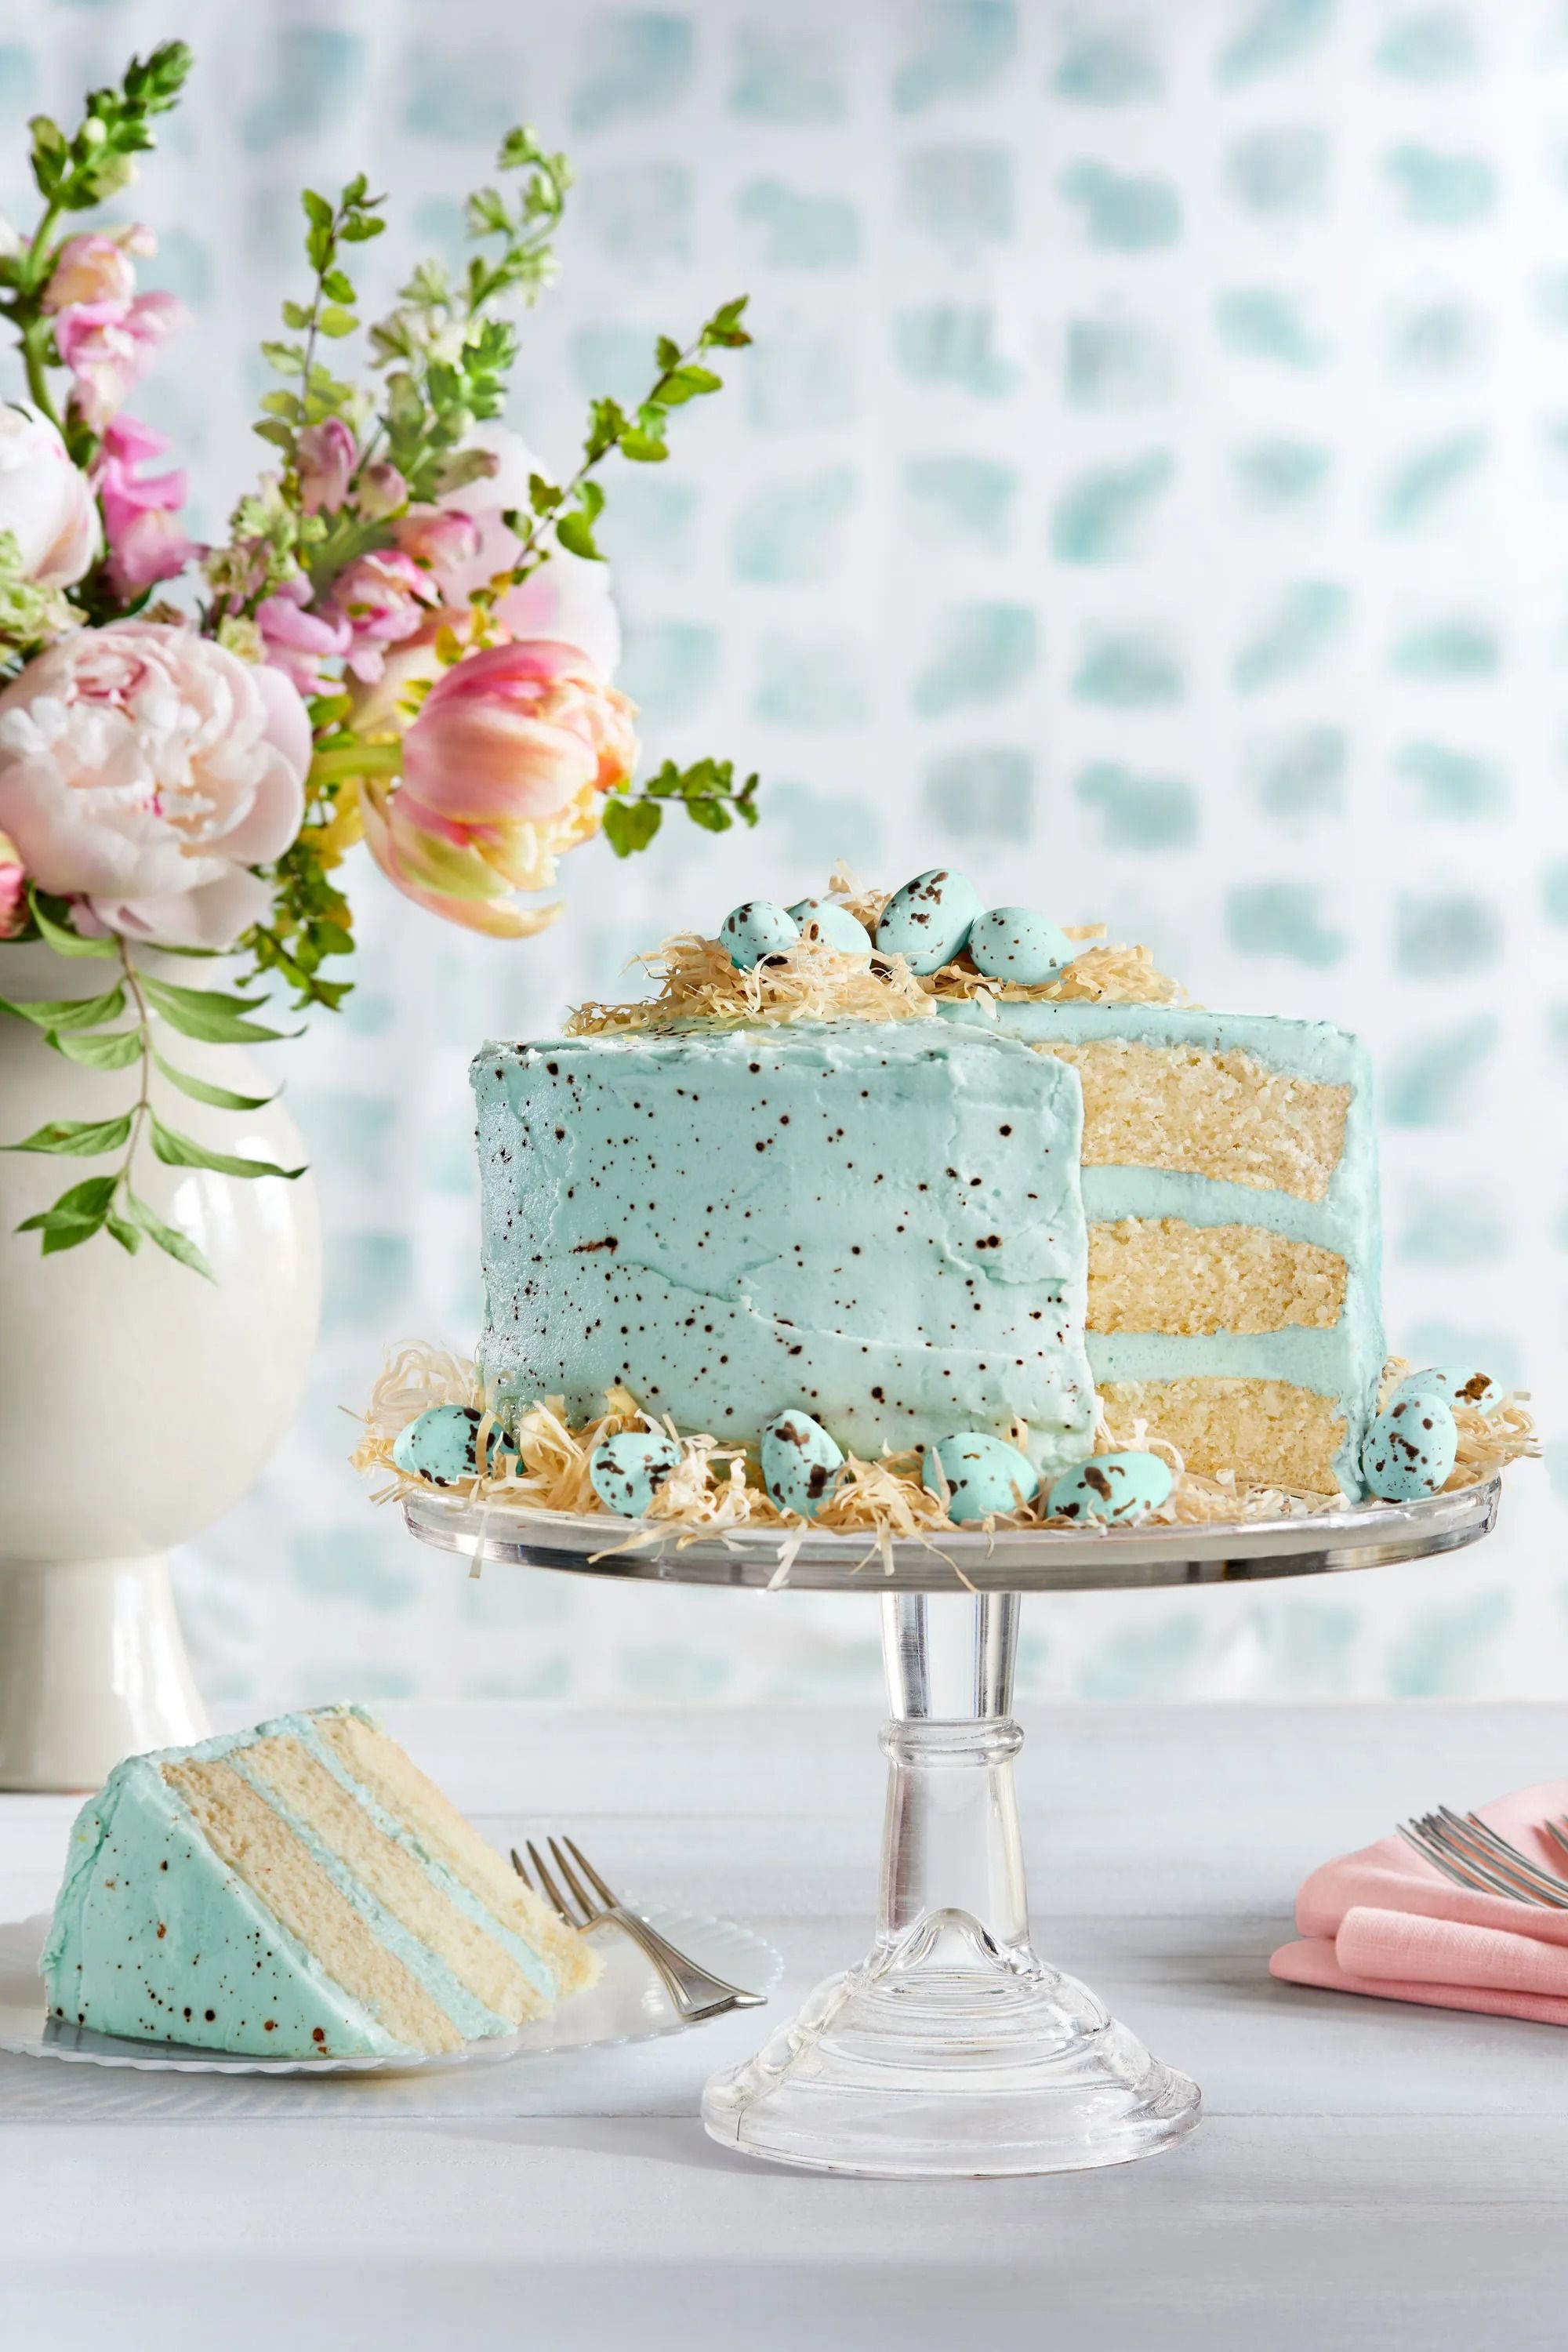 25 Cute Birthday Cake Ideas : Buttercream Cake with Butterfly Details